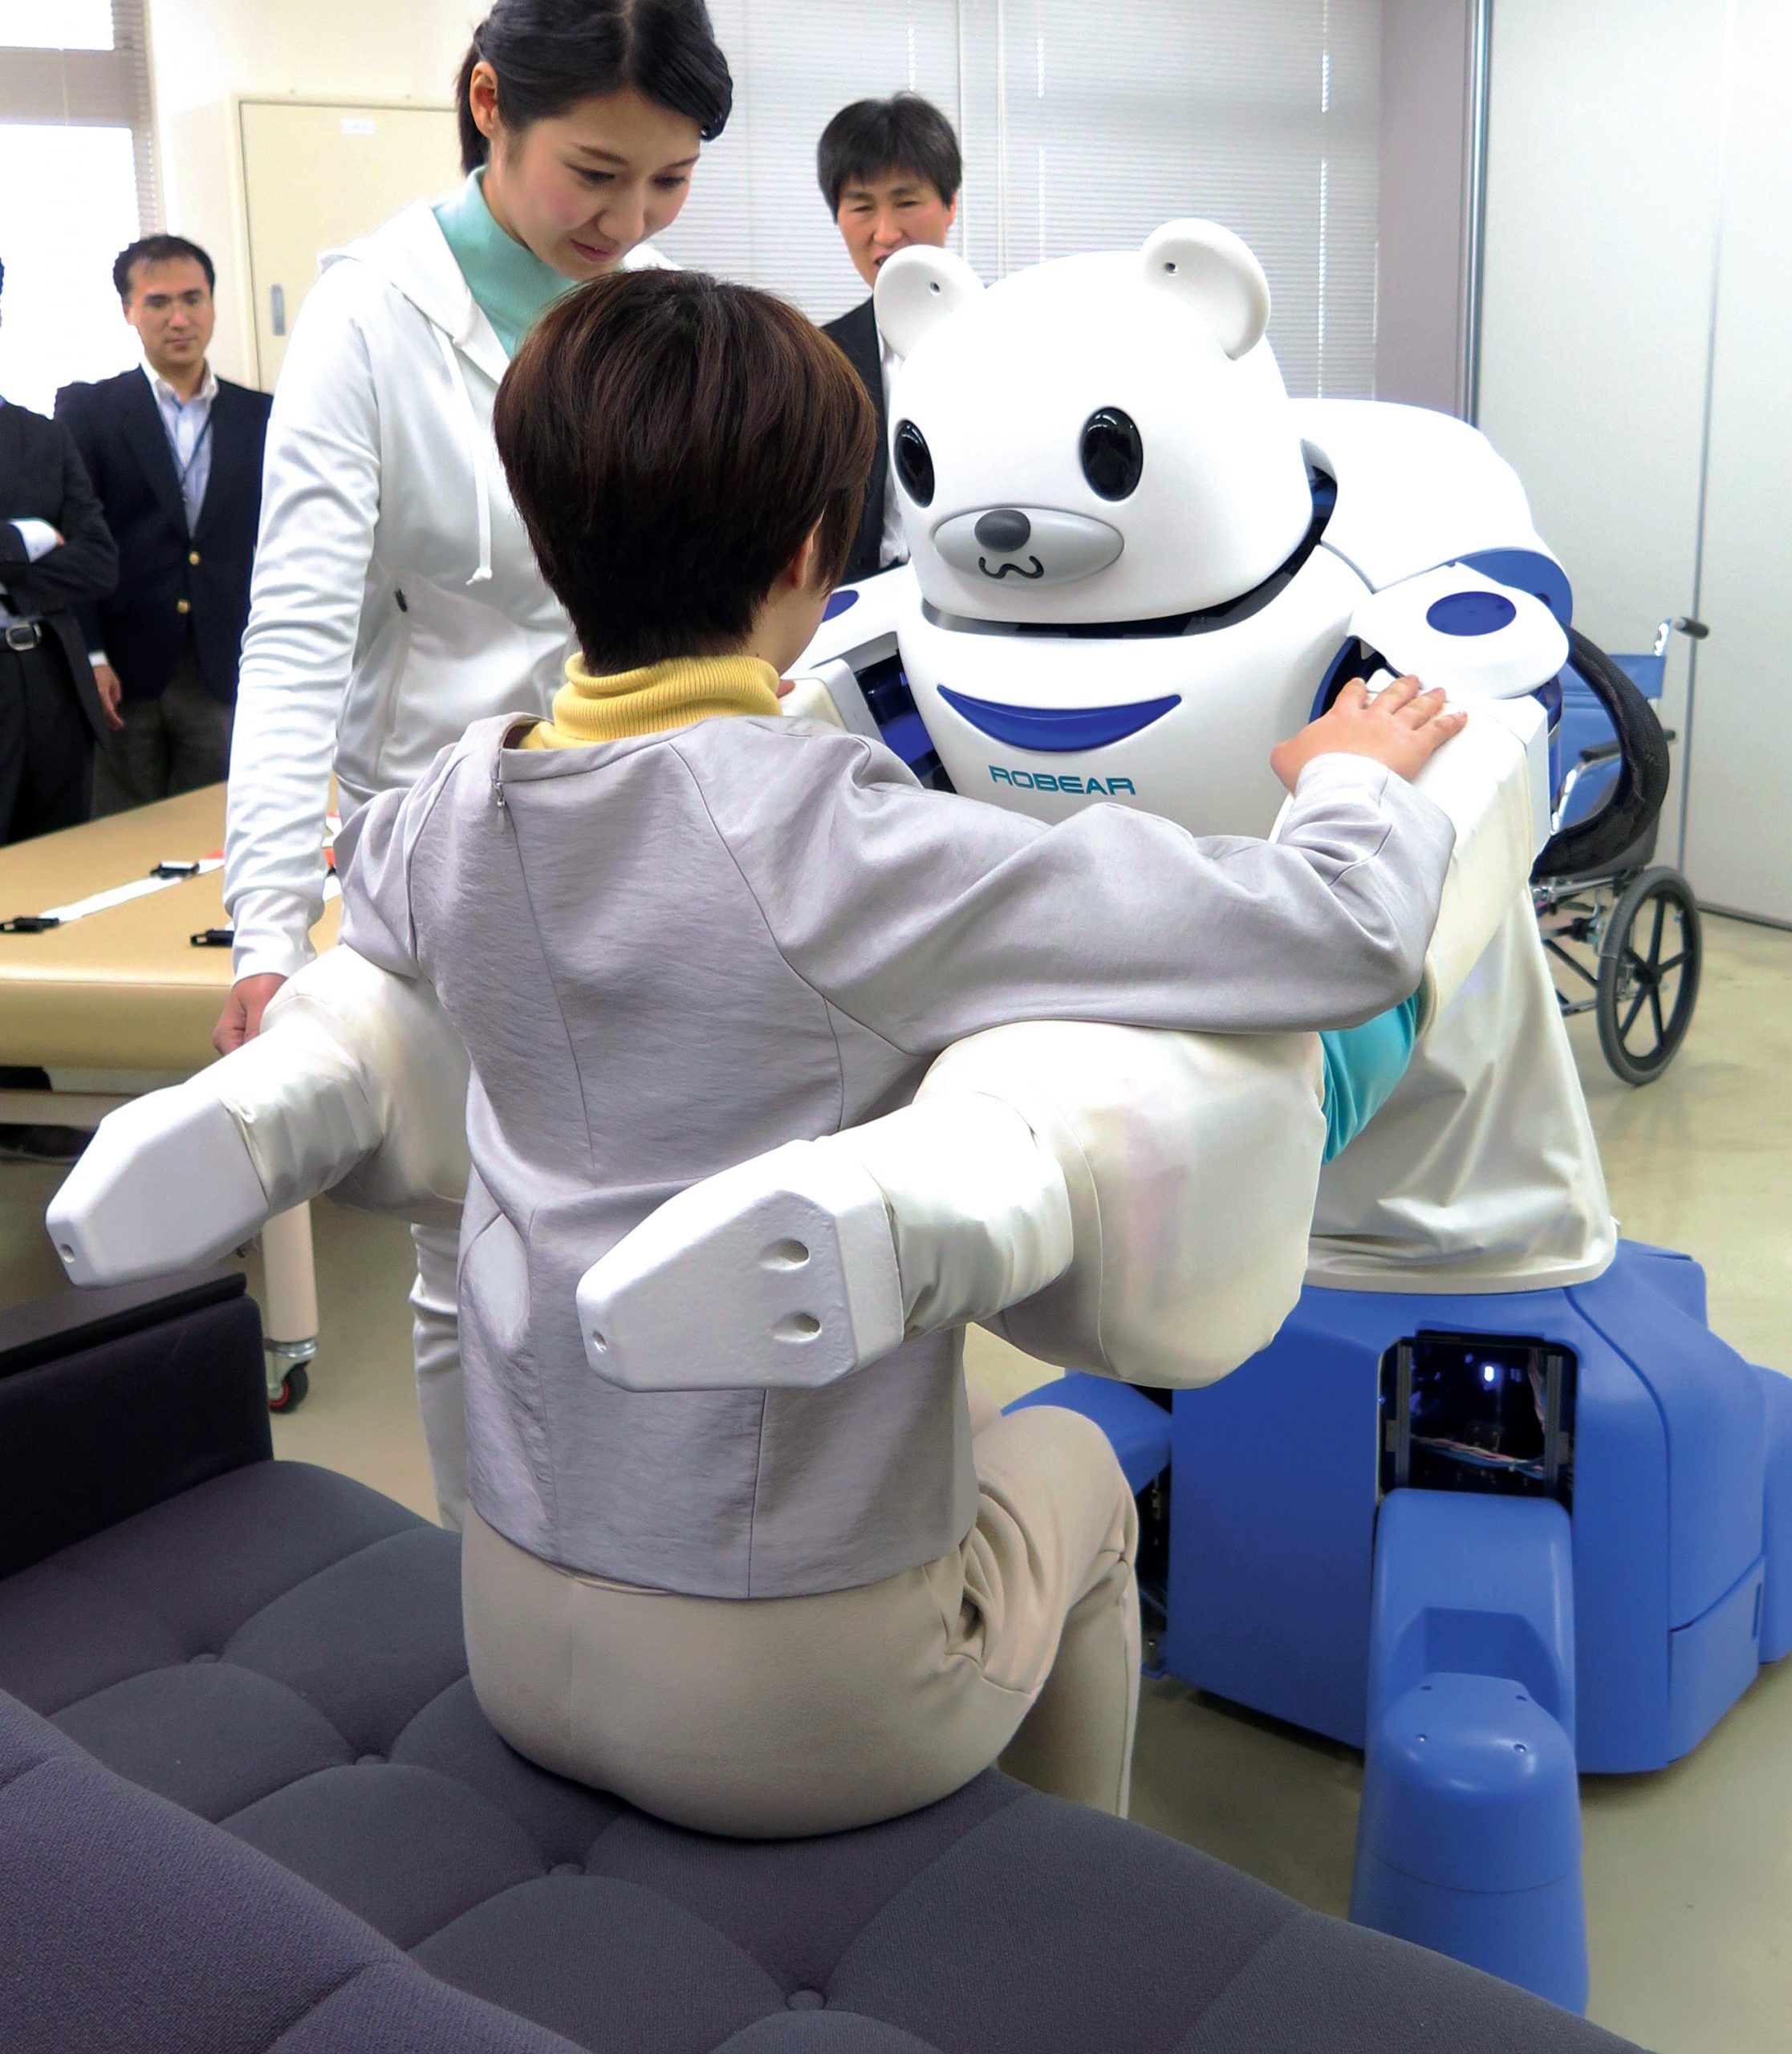 Robear poised to lift a person during a press demonstration.